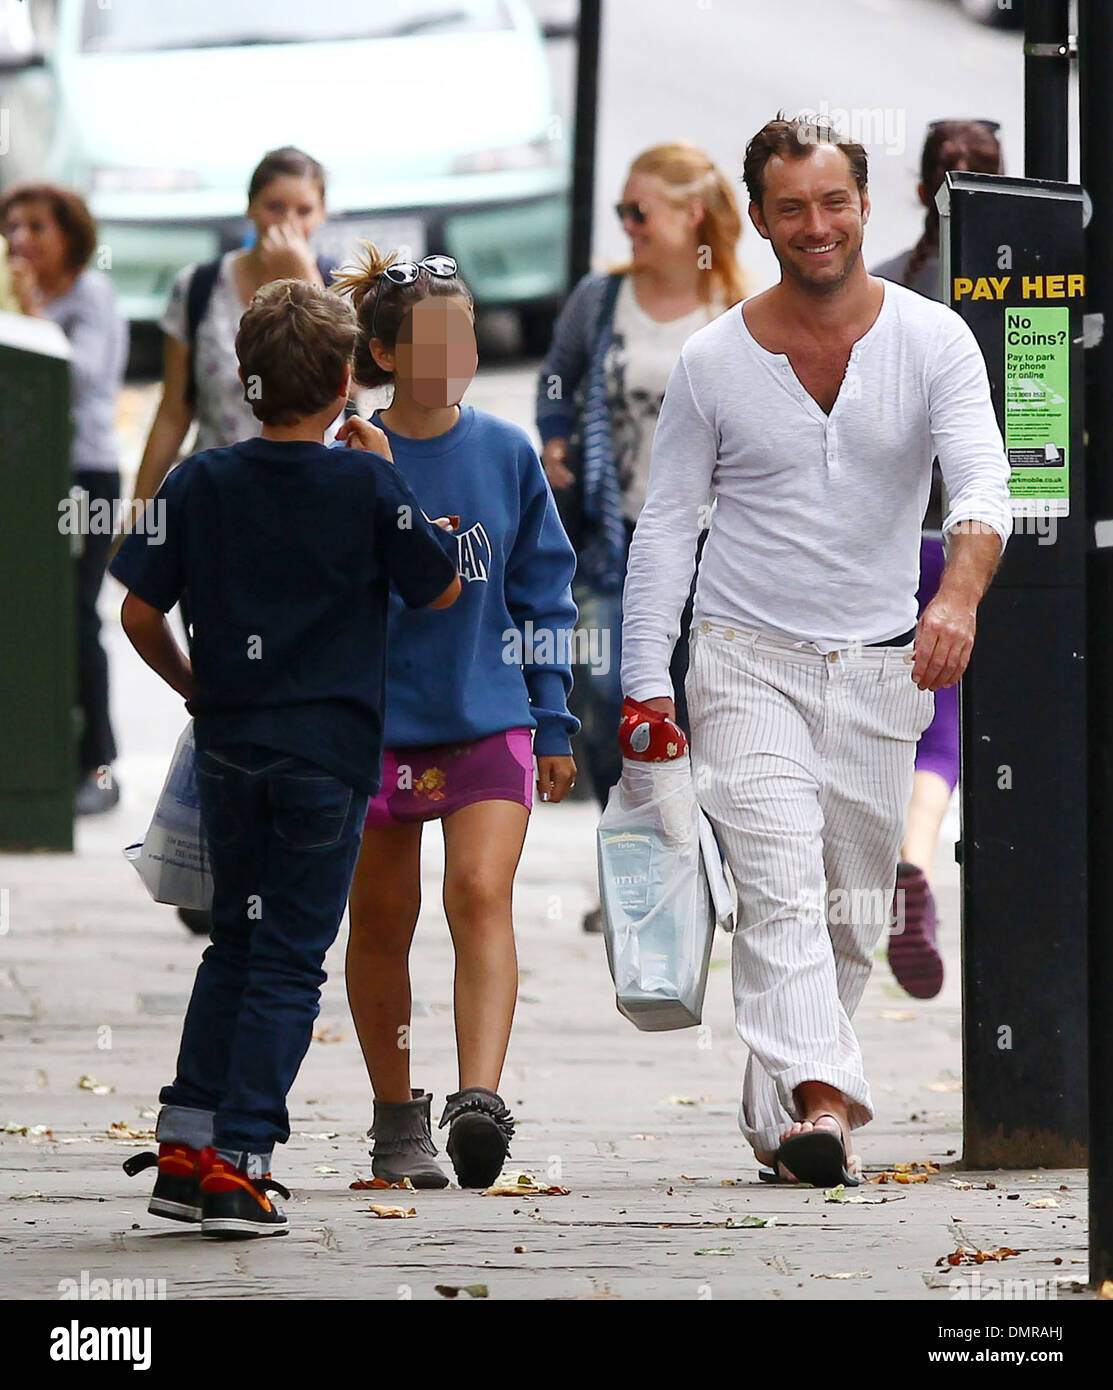 Jude Law with his daughter Iris and son Rudy walking through Primrose Hill in London London England - 13.08.12 Stock Photo